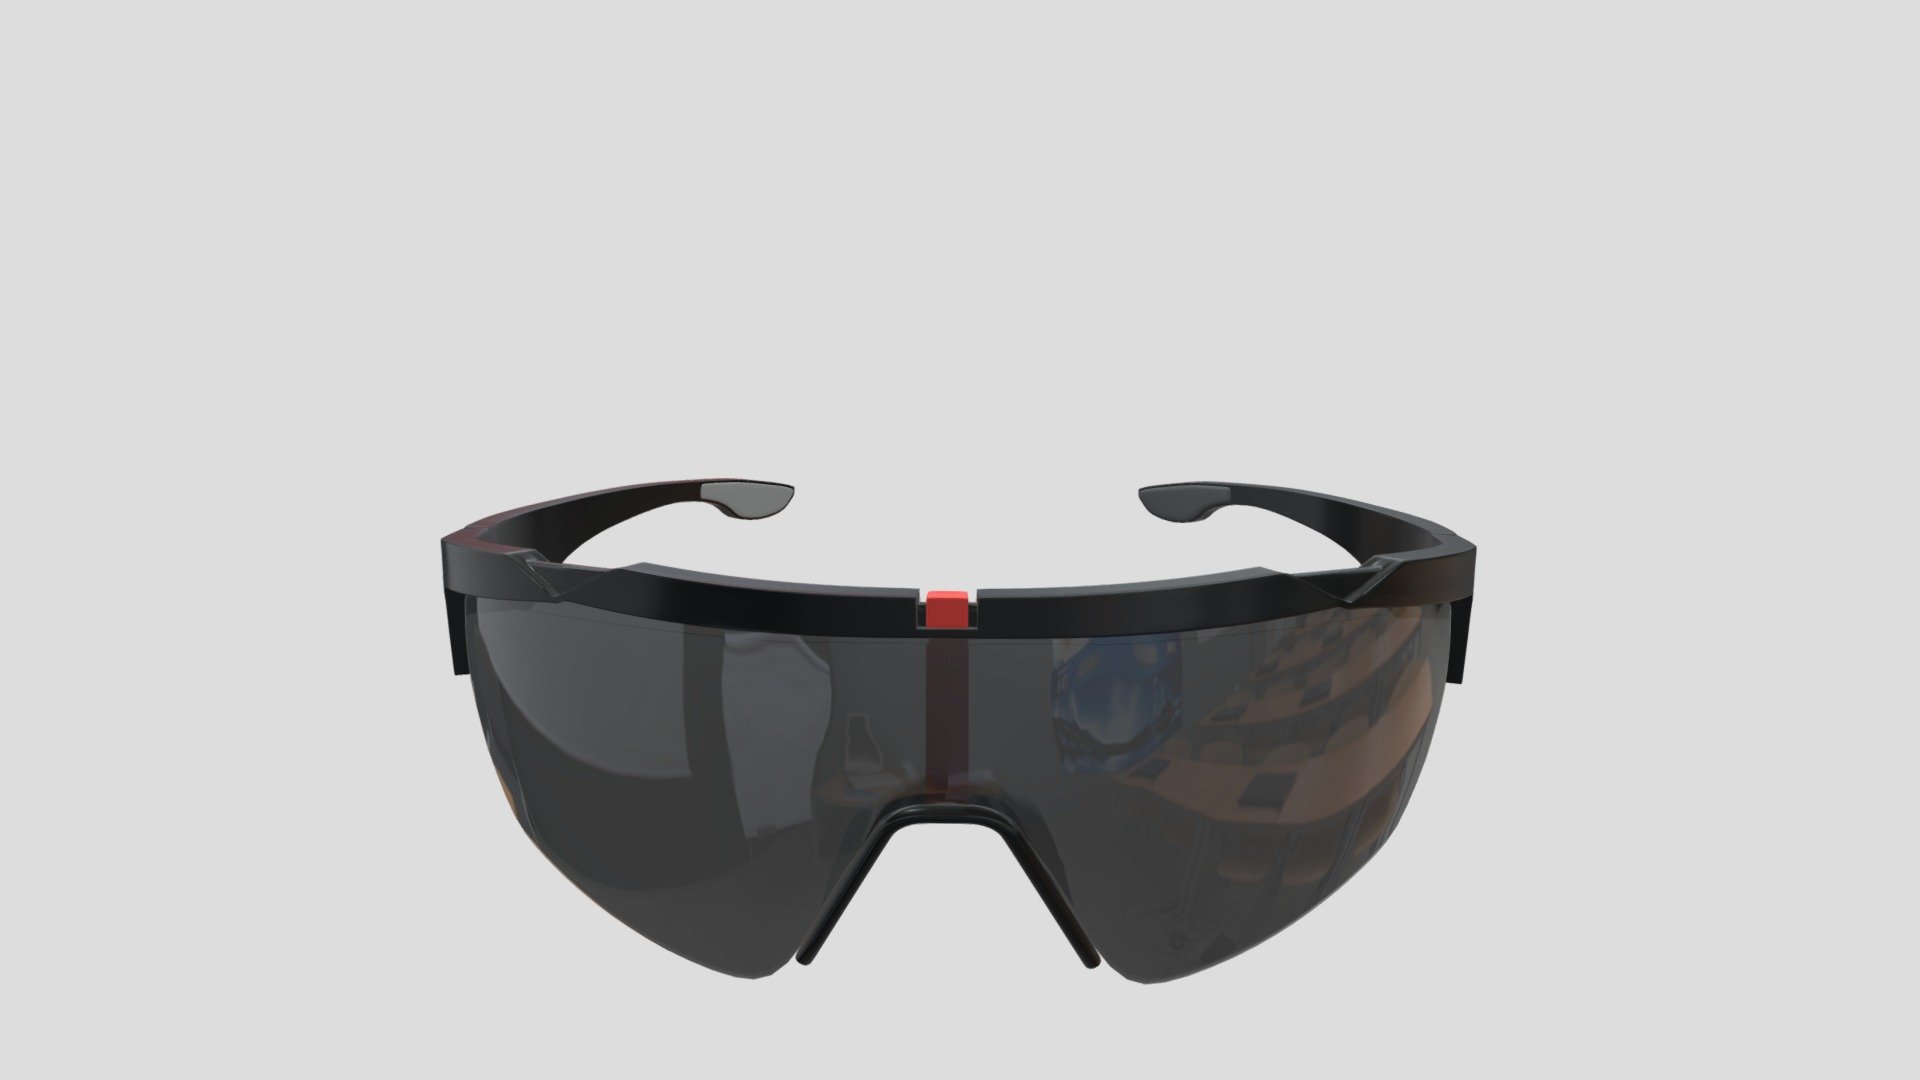 High-quality low poly model of fashion sport sunglasses with black plastic frame and gray lenses. Ideal for close-up renders and photo-realistic scenes 3d model